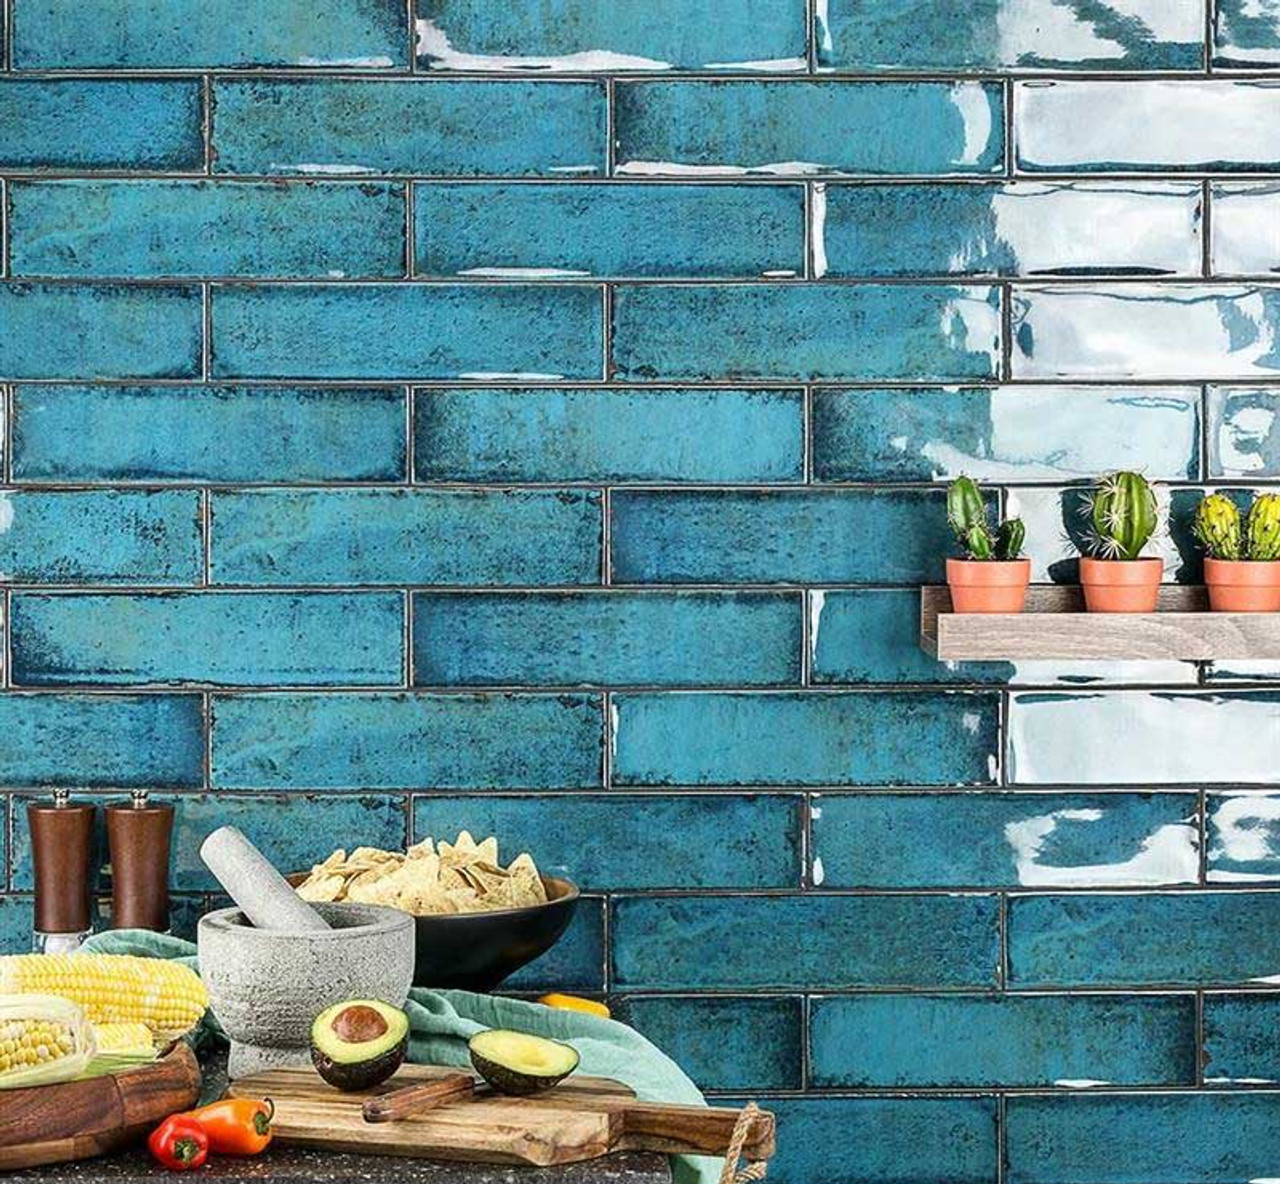 Bright blue glossy metro tiles on a kitchen wall in a brick bond pattern